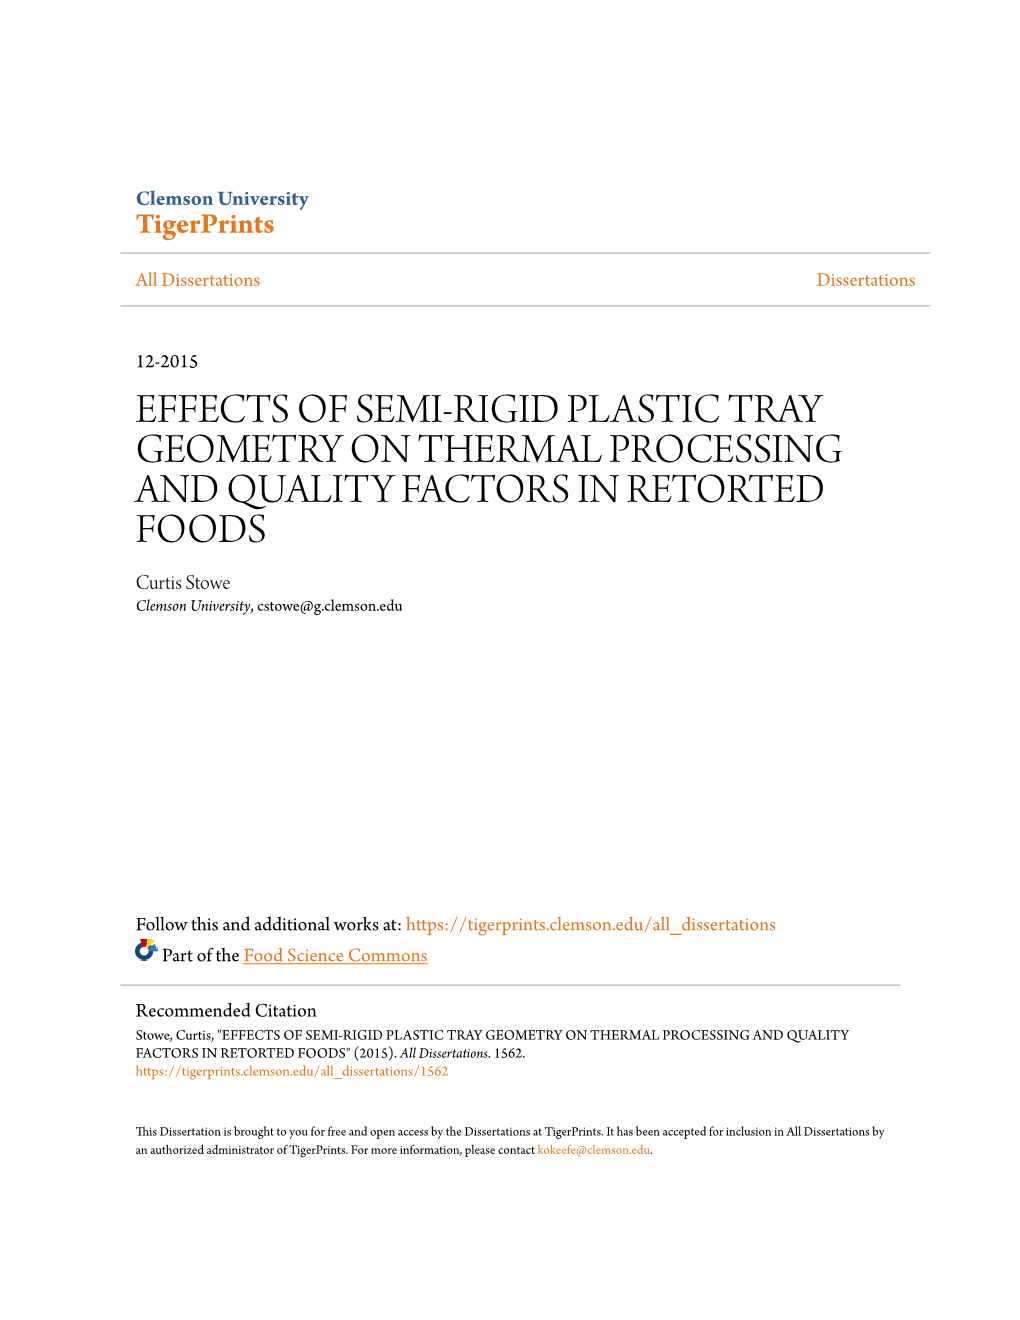 EFFECTS of SEMI-RIGID PLASTIC TRAY GEOMETRY on THERMAL PROCESSING and QUALITY FACTORS in RETORTED FOODS Curtis Stowe Clemson University, Cstowe@G.Clemson.Edu